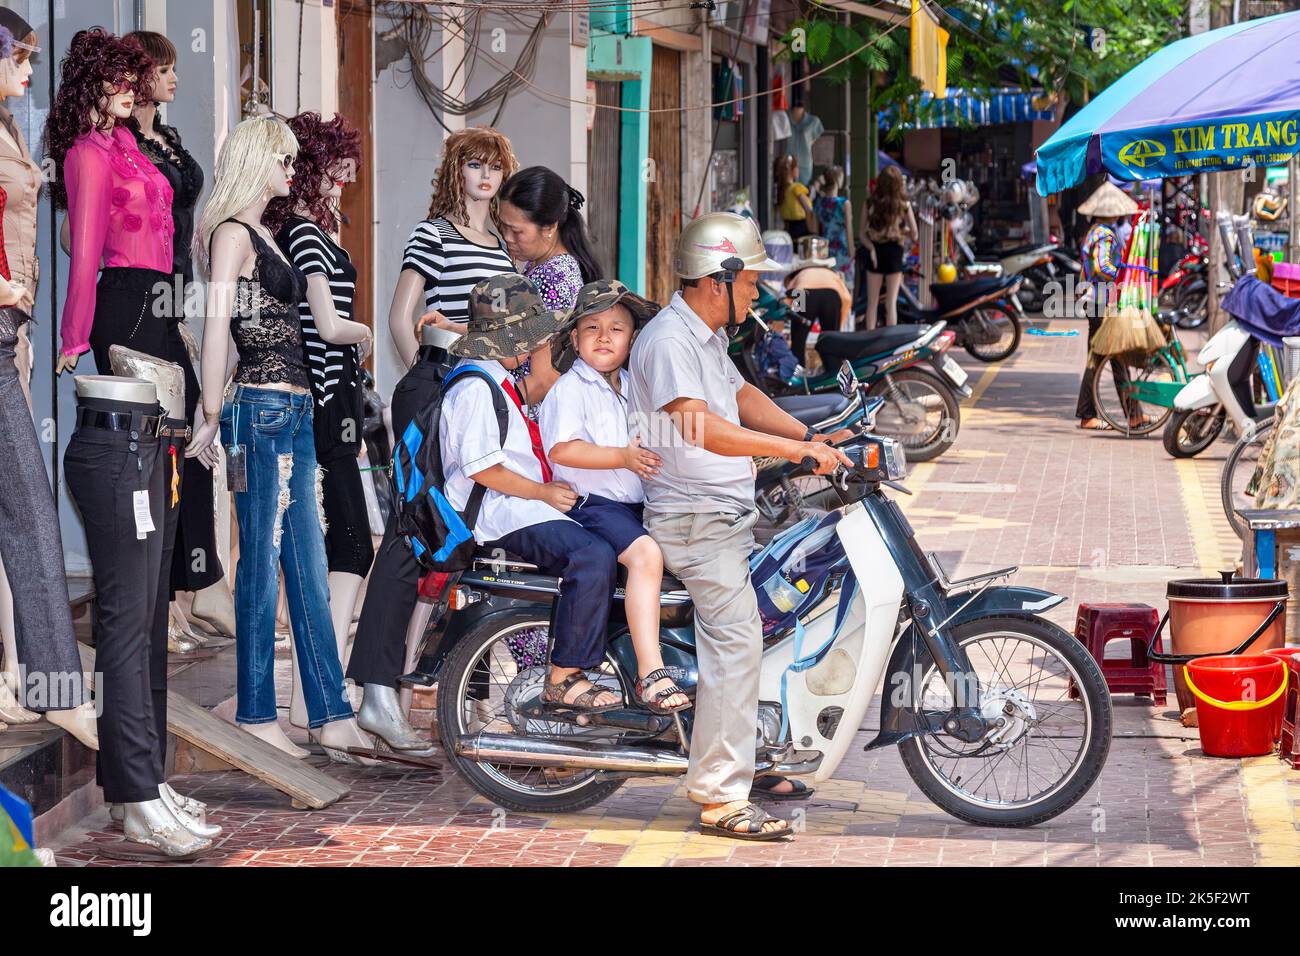 Family on motorcycle in busy street, Hai Phong, Vietnam Stock Photo